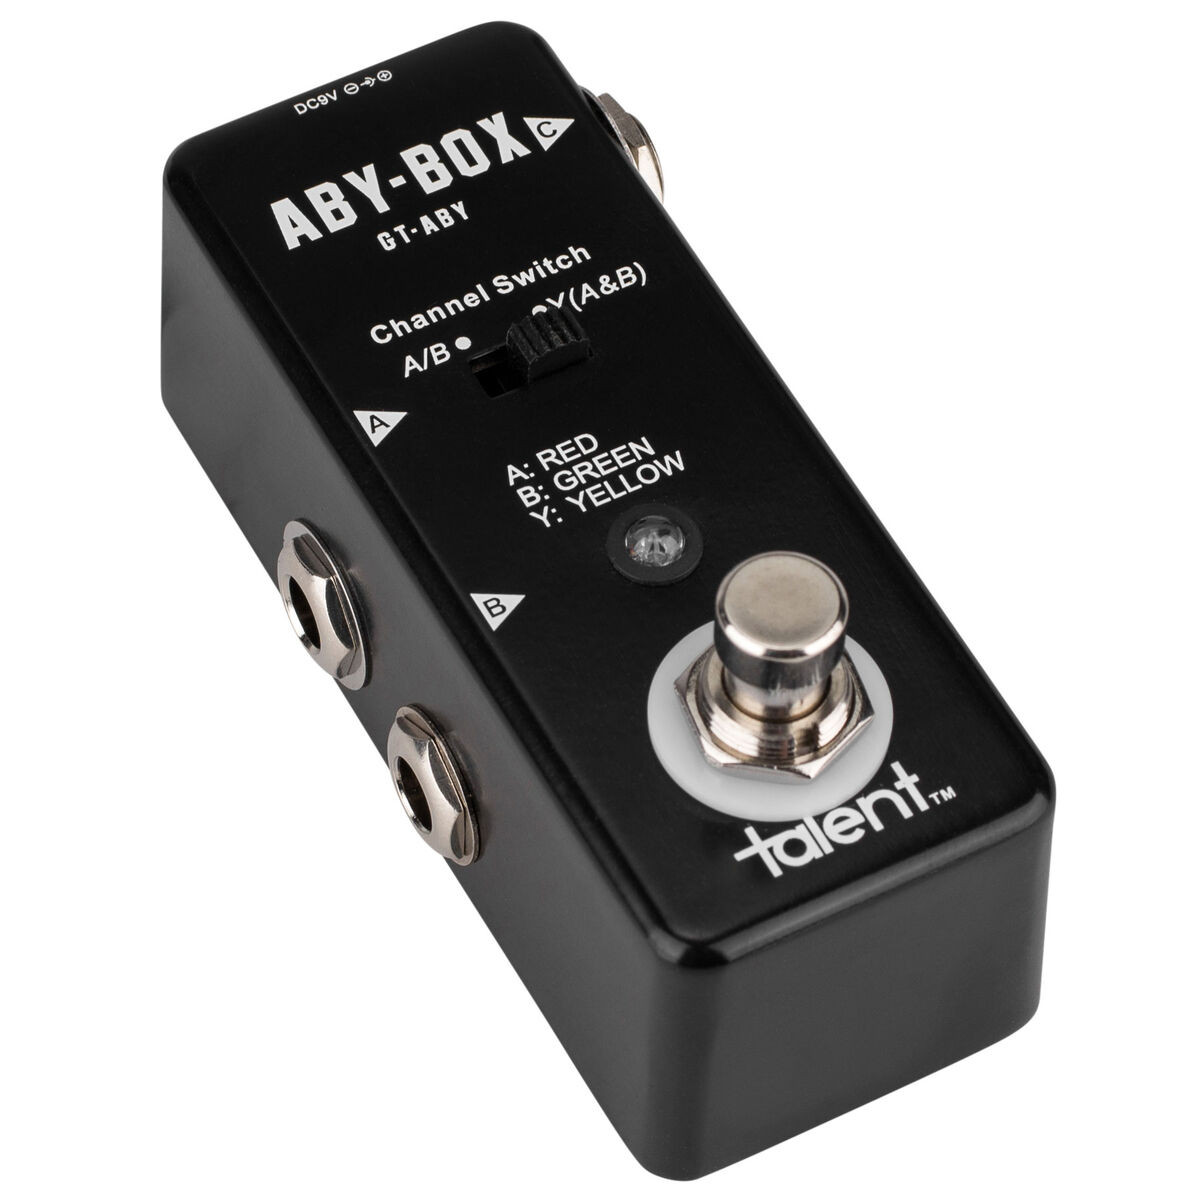 wit Onzorgvuldigheid Kwalificatie Talent GT-ABY ABY-BOX Guitar Mini FX Pedal Stomp Box